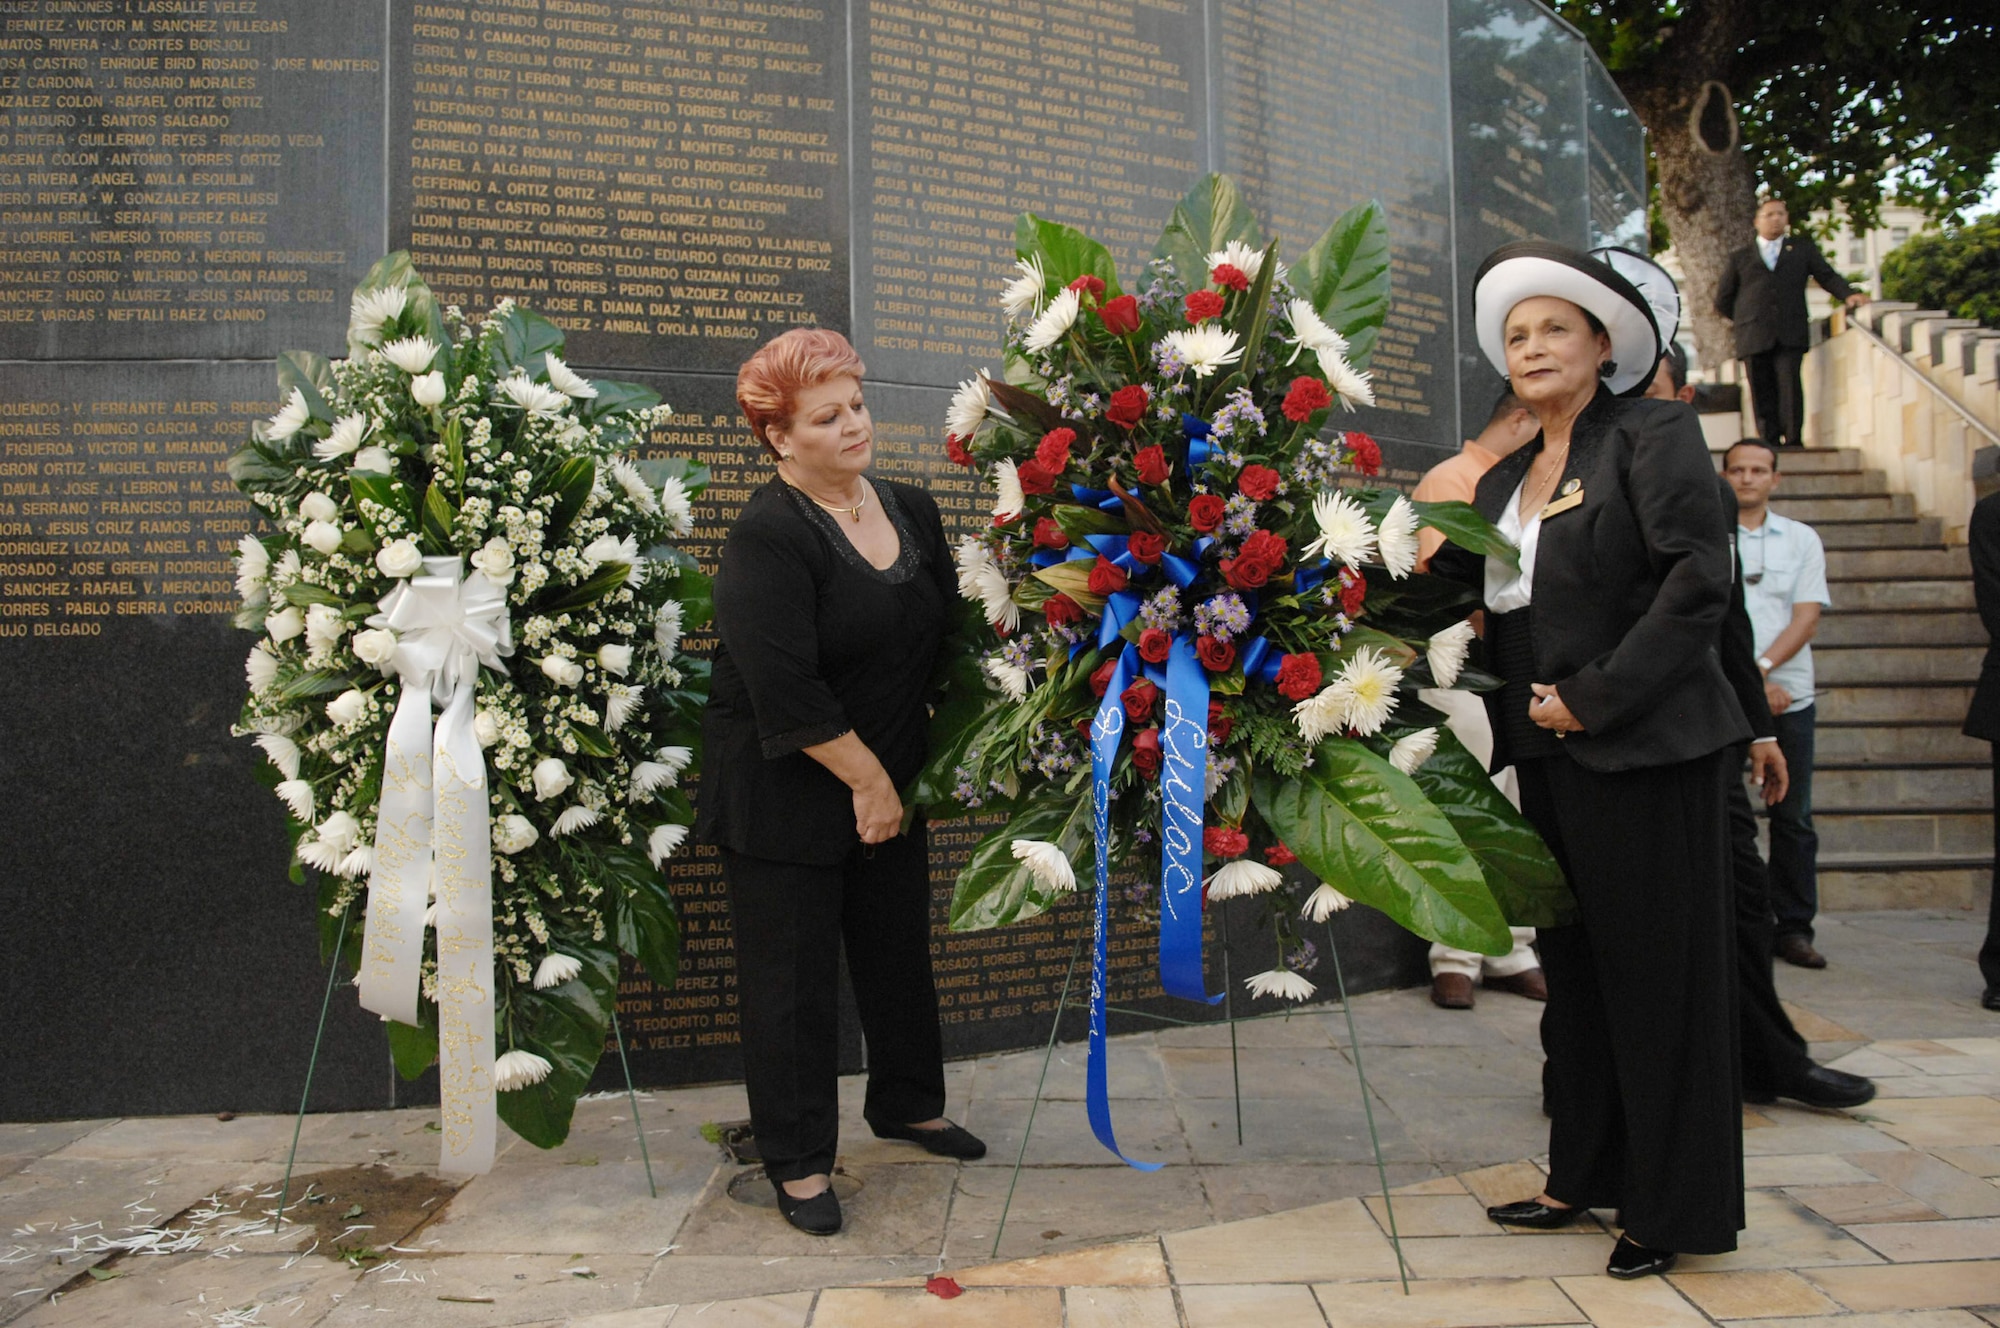 The League of United Latin American Citizens Puerto Rico State Director Haydee Rivera (left) and LULAC National President Rosa Rosales place a wreath at the El Capitolio 's El Monumento de la Recordacion during the Memorial Wreath Laying Ceremony in Old San Juan, Puerto Rico, the location of the 2009 League of United Latin American Citizens convention and exposition July 14 at San Juan, Puerto Rico. LULAC is the nation's oldest and largest Hispanic organization advocating for Latinos in the United States for 80 years. (U.S. Air Force photo/Tech. Sgt. Francisco V. Govea II) 